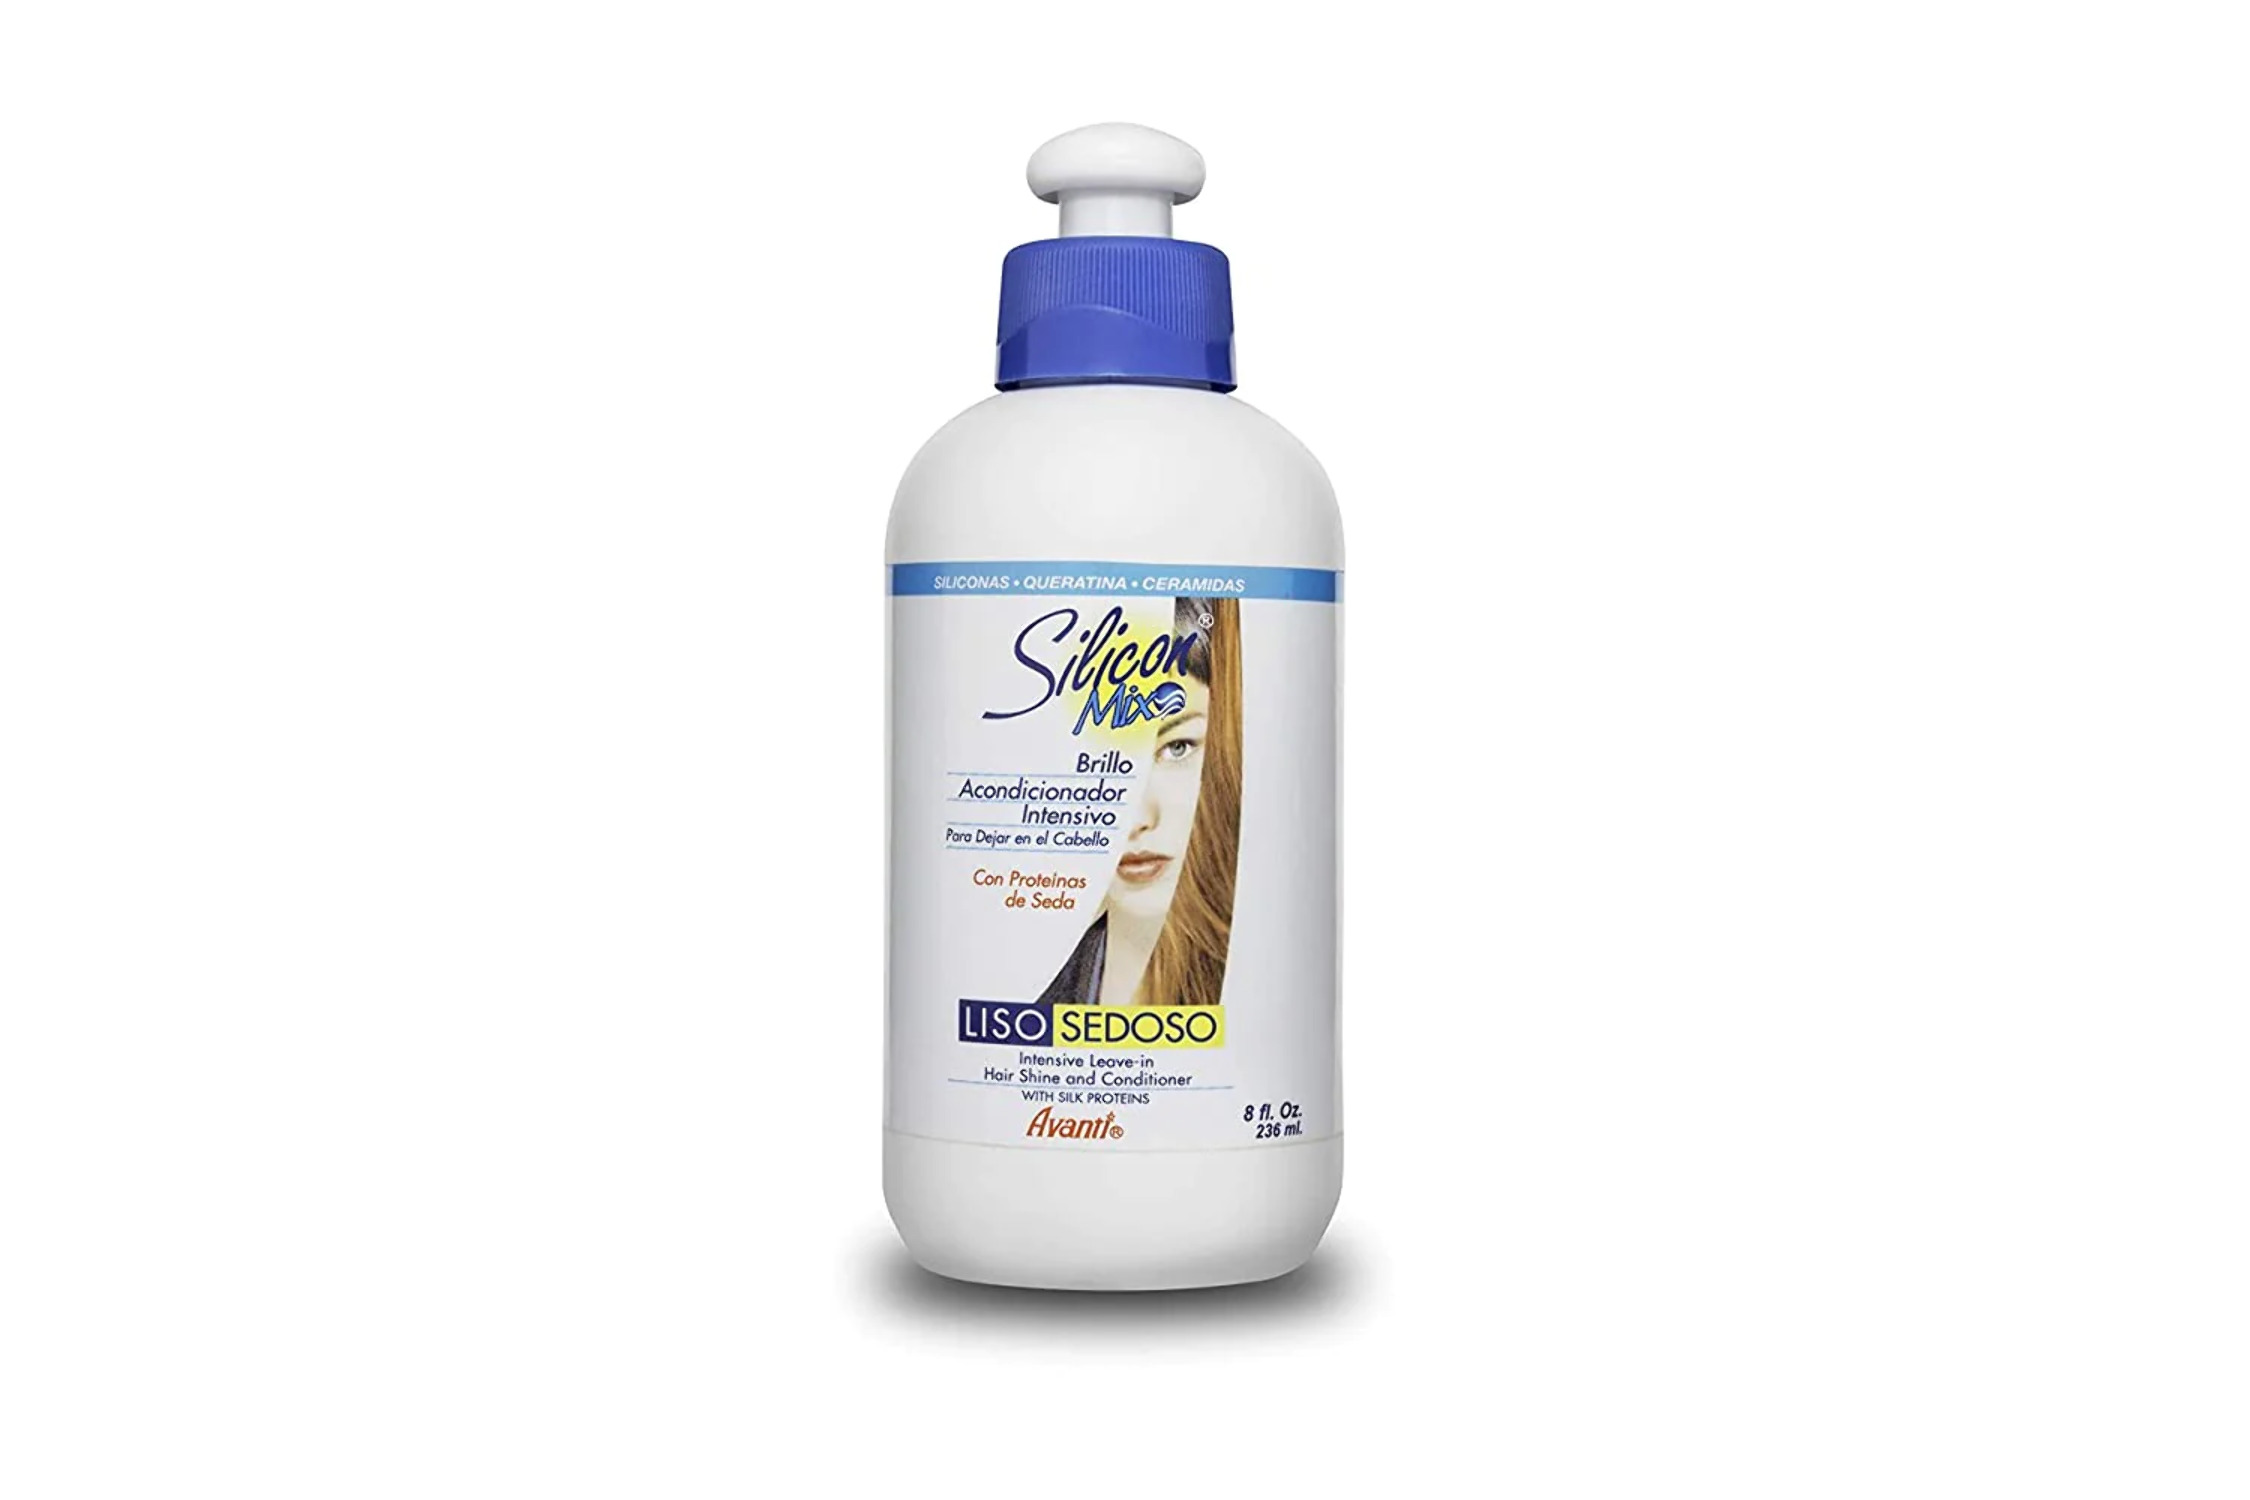 Silicone Mix - Protein Liso Intensive Leave-In Hair Shine and Conditioner 